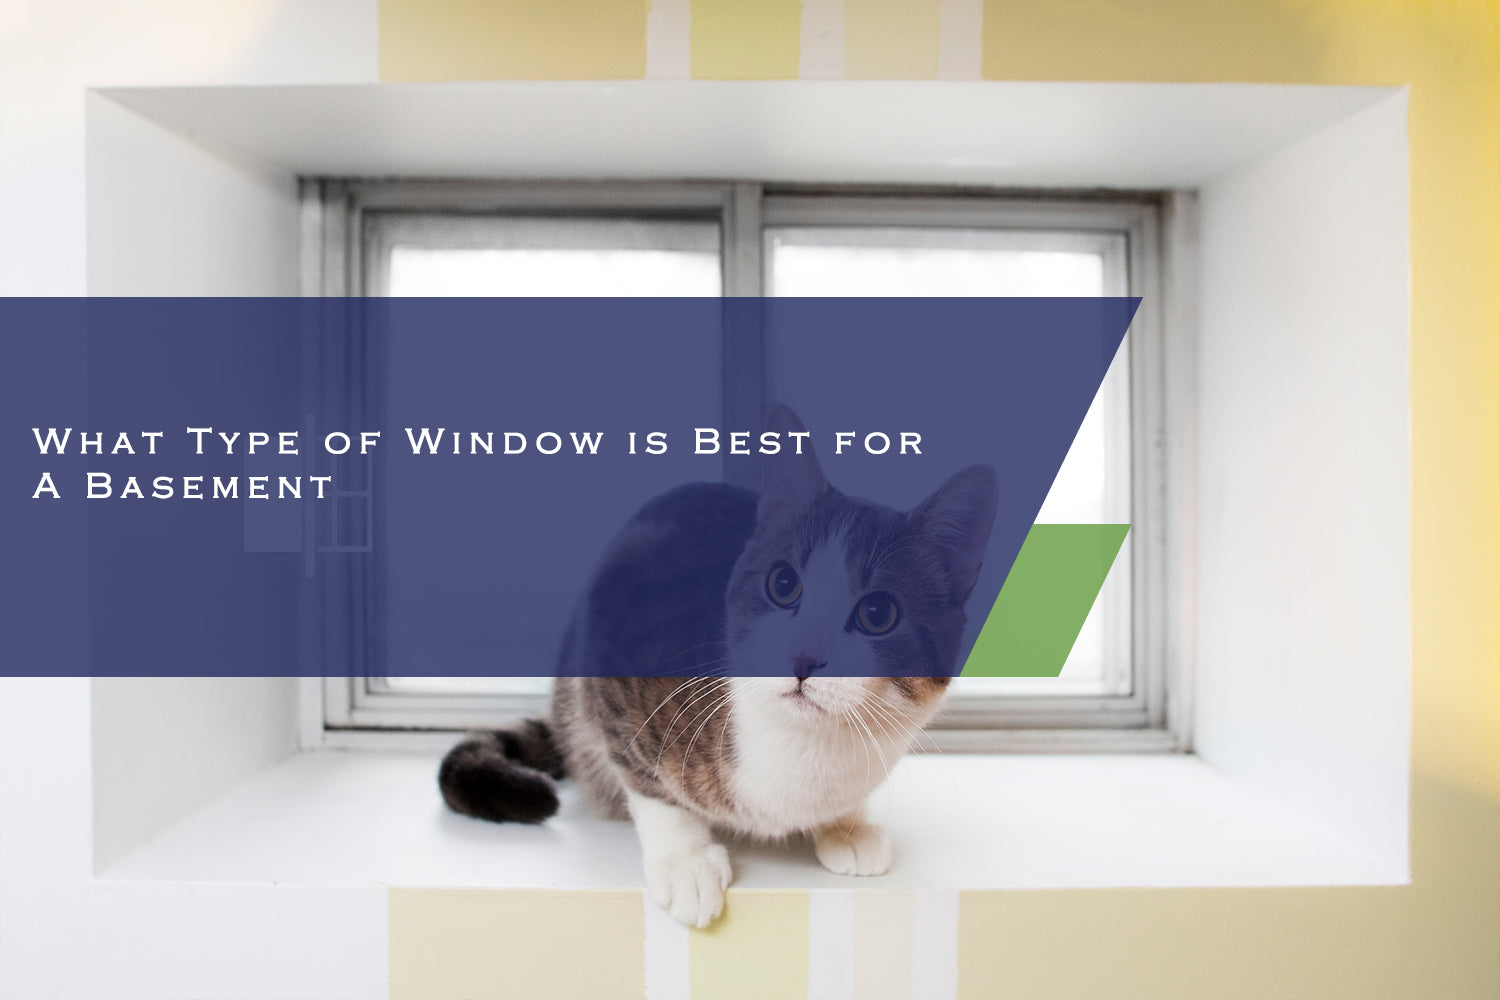 What Type of Window is Best for A Basement?